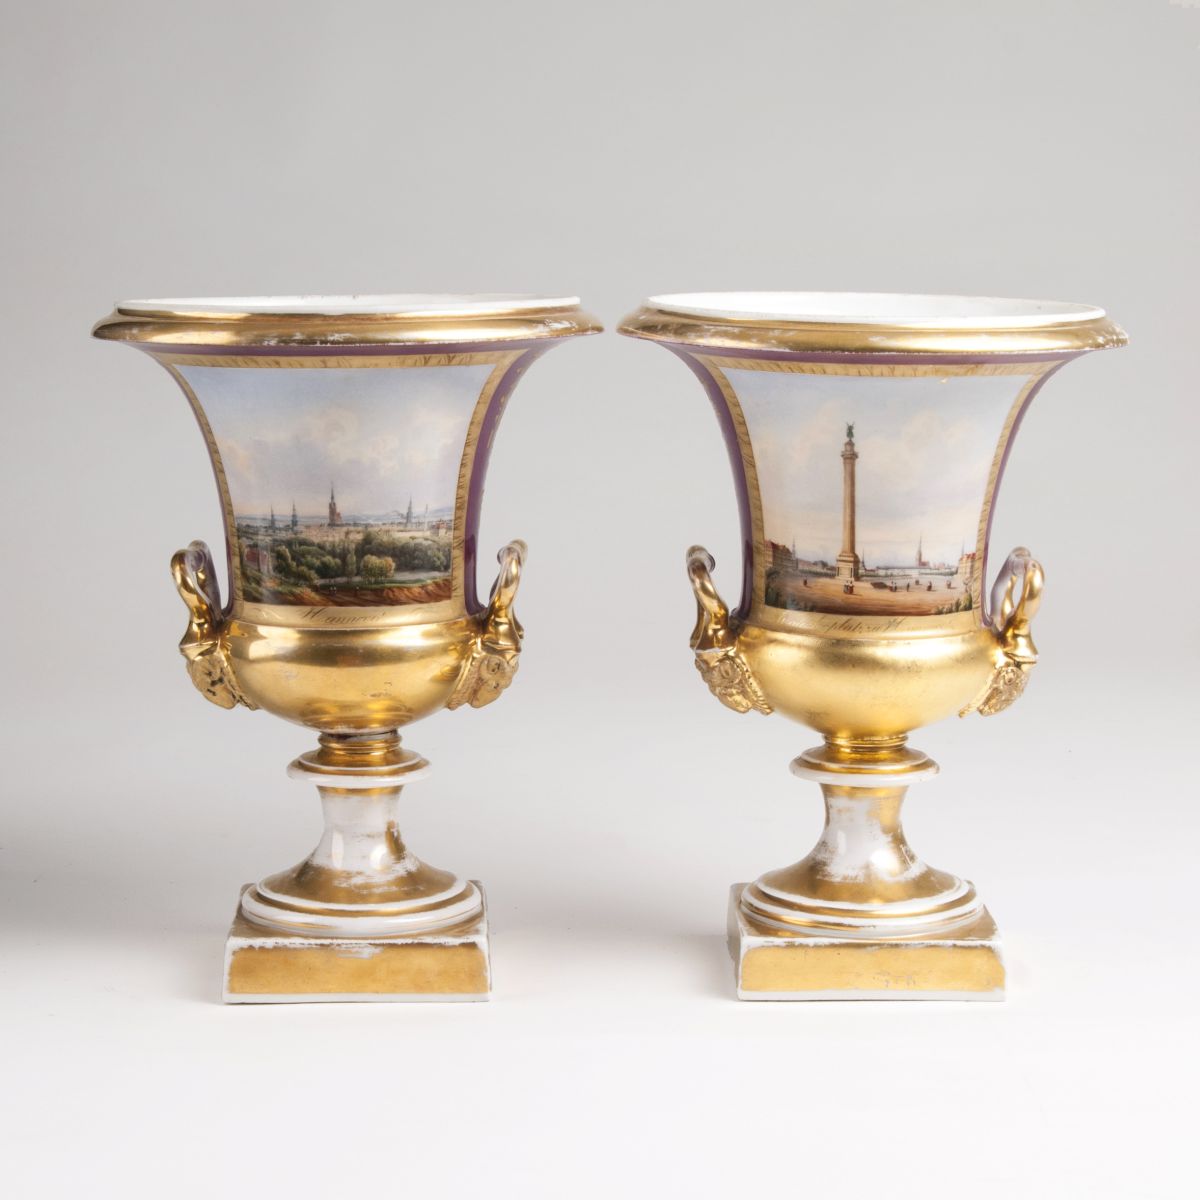 A pair of crater vases with views of  Hannover